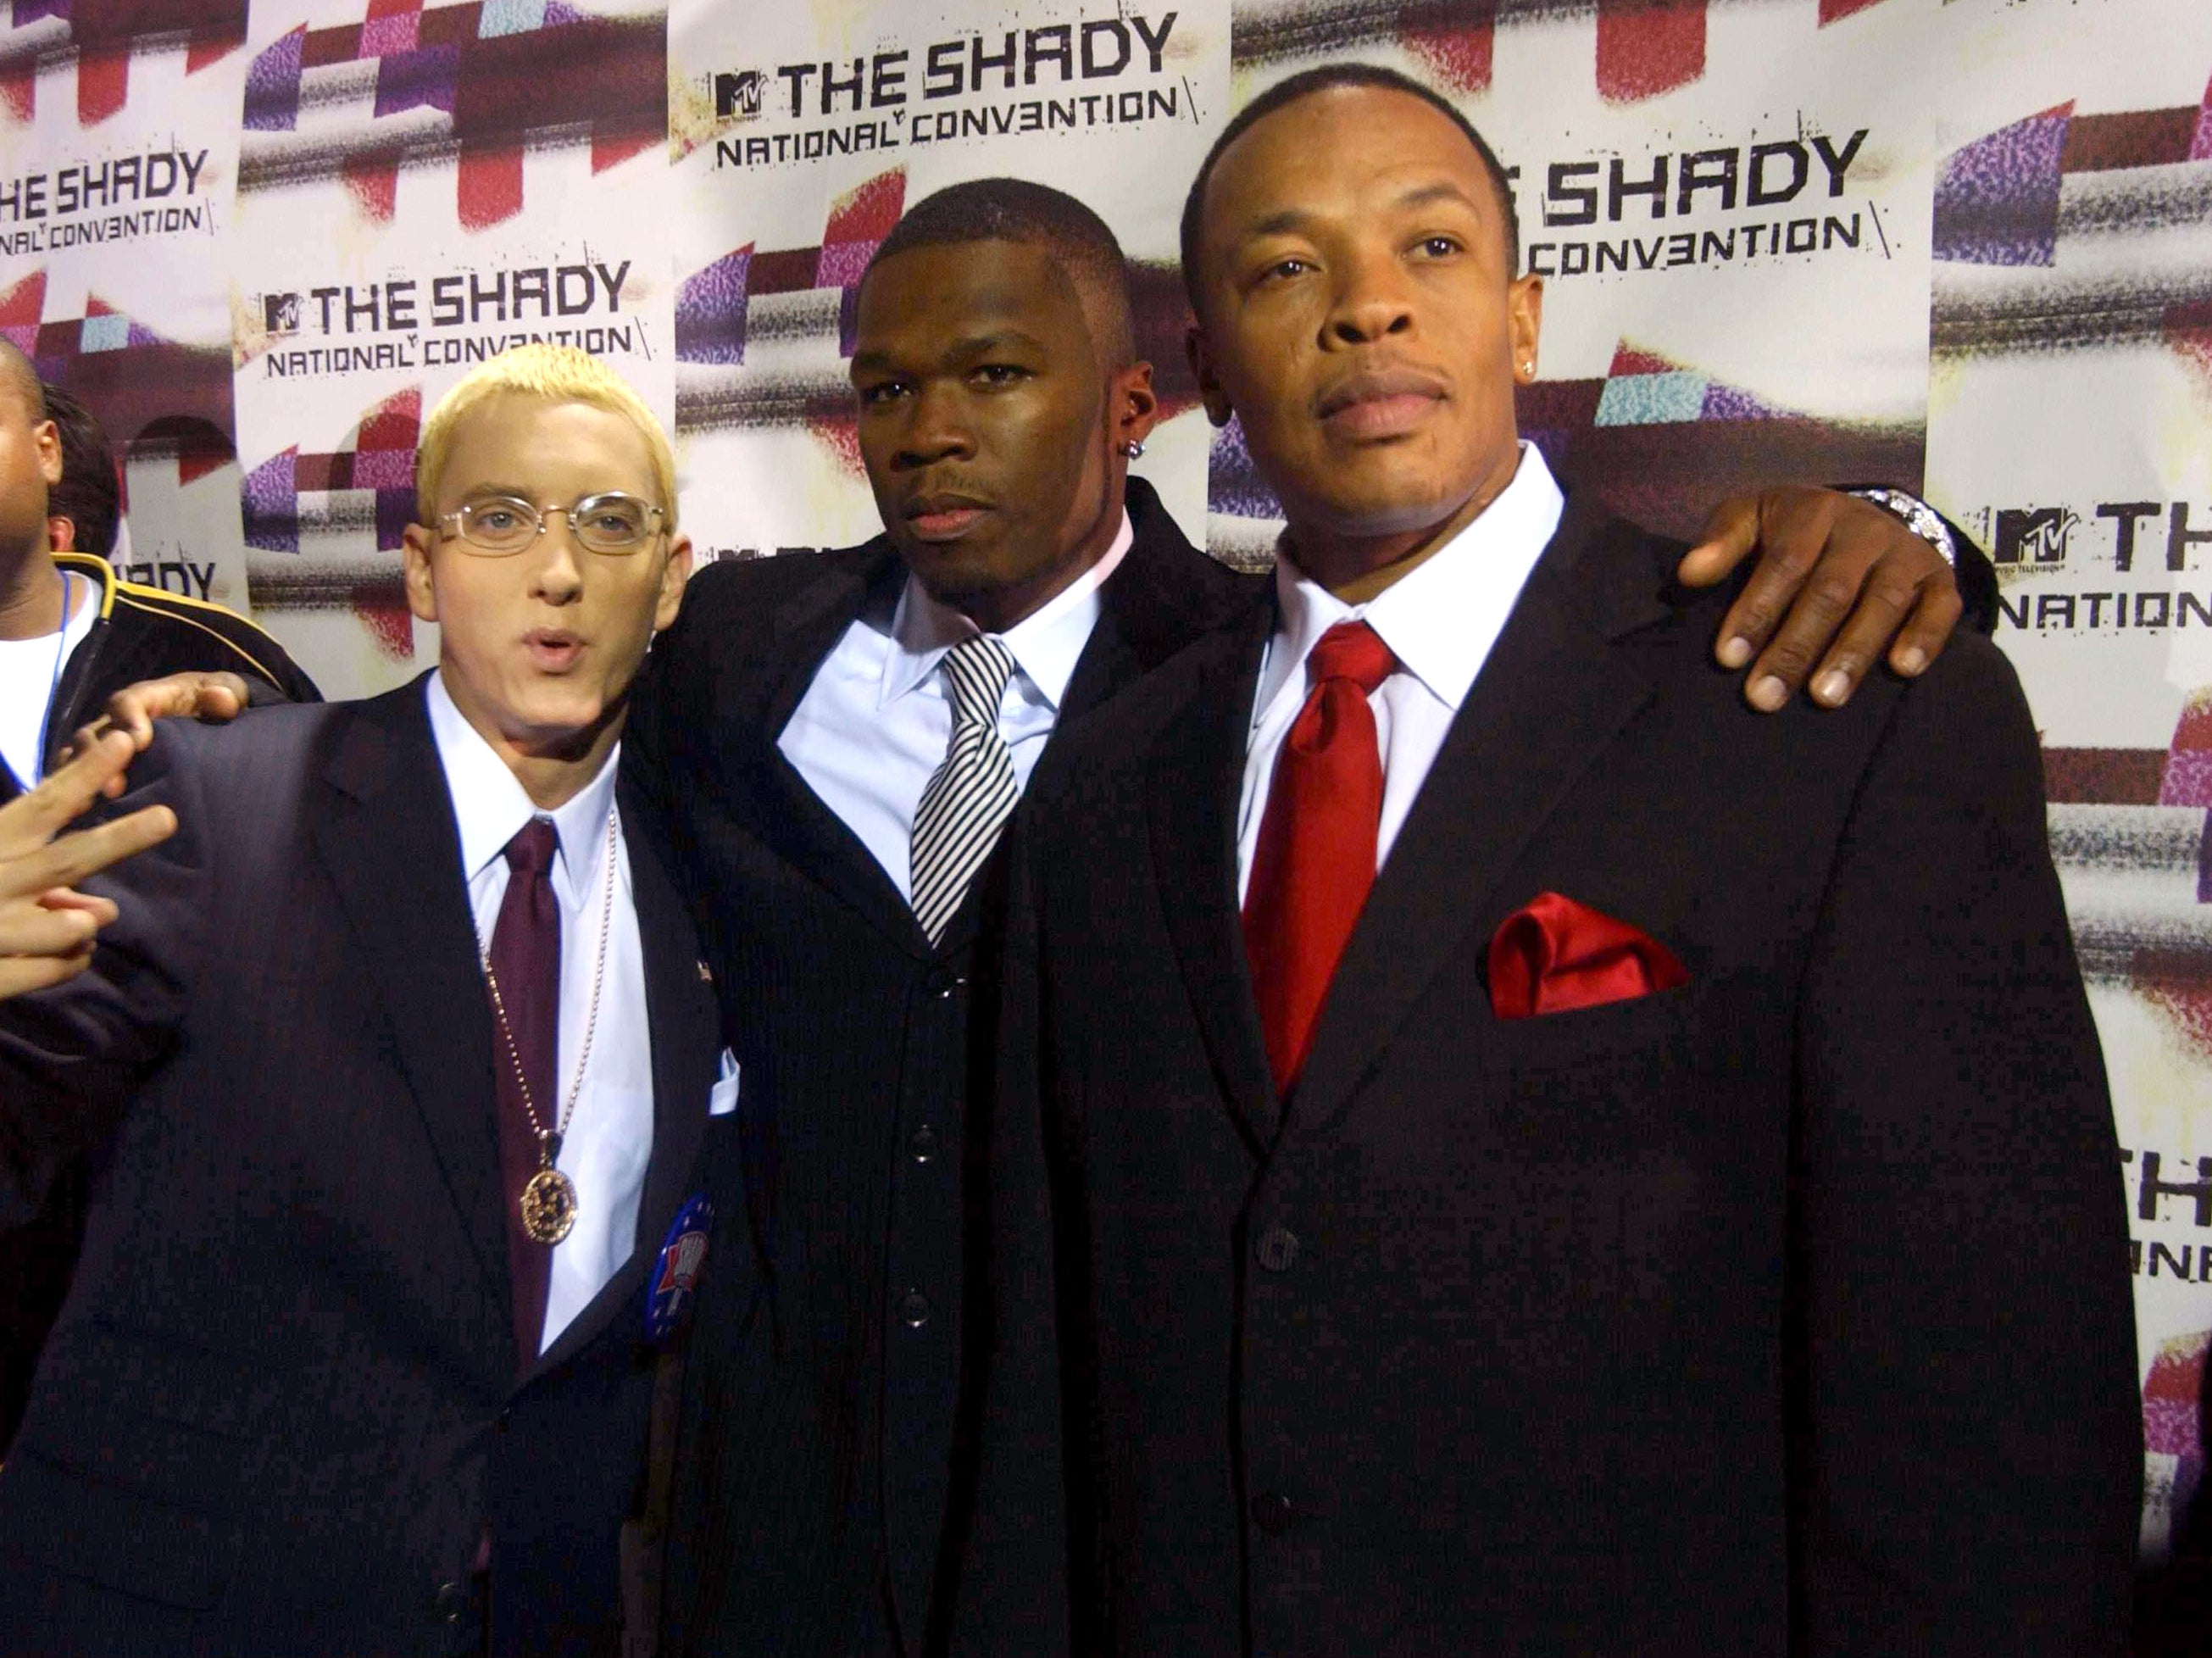 Eminem, 50 Cent and Dr Dre in 2004, the year after Get Rich or Die Tryin’ was released